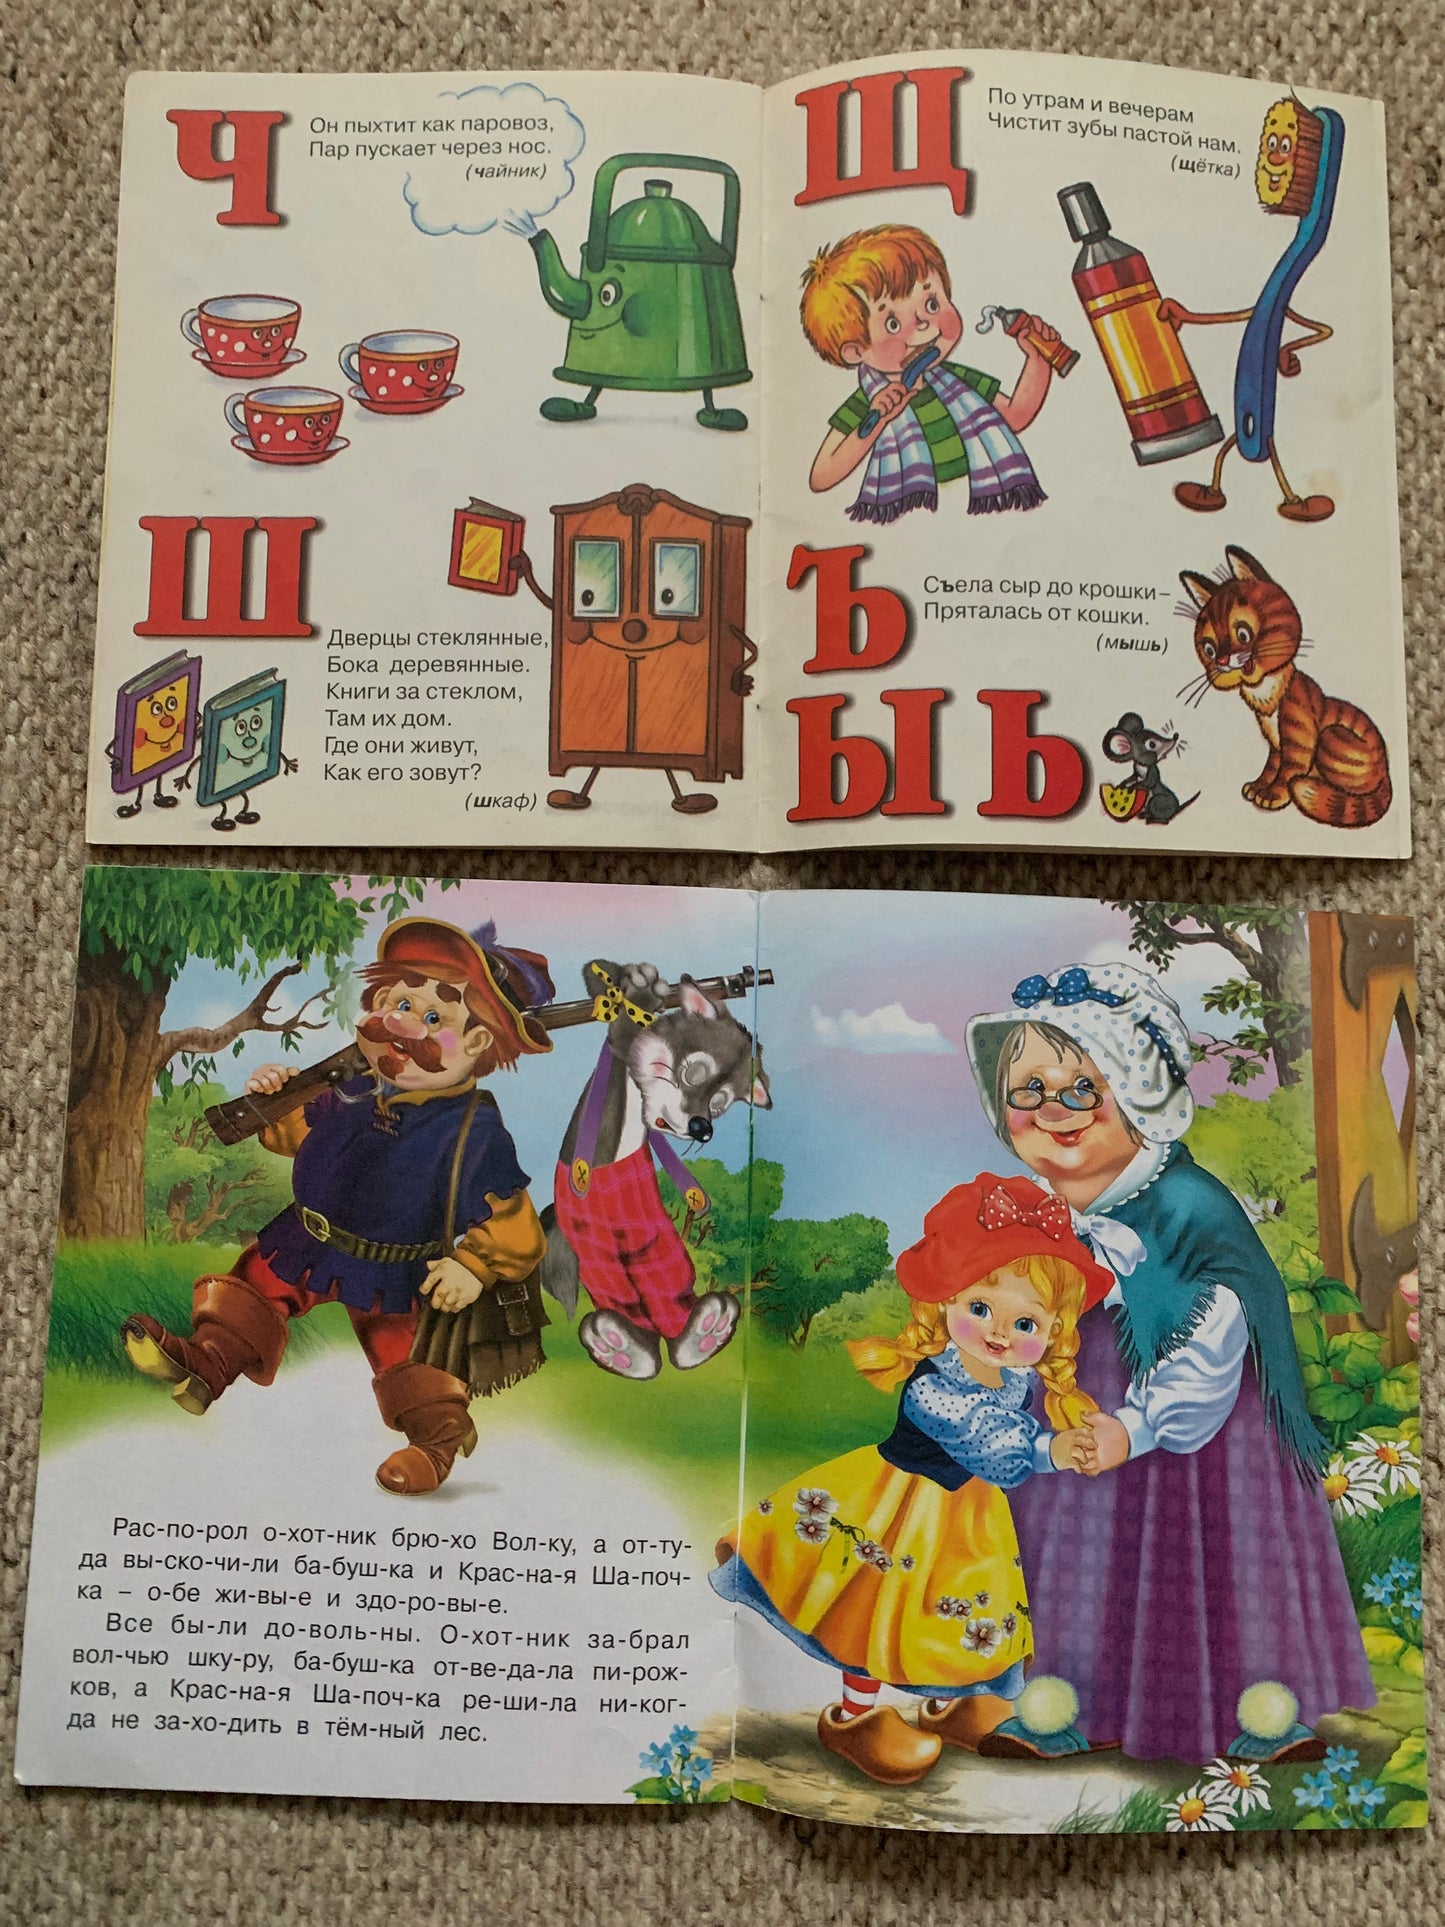 Vintage Children's Books in Russian - Primer books - Learning to read - Printed in Russia - 2010s